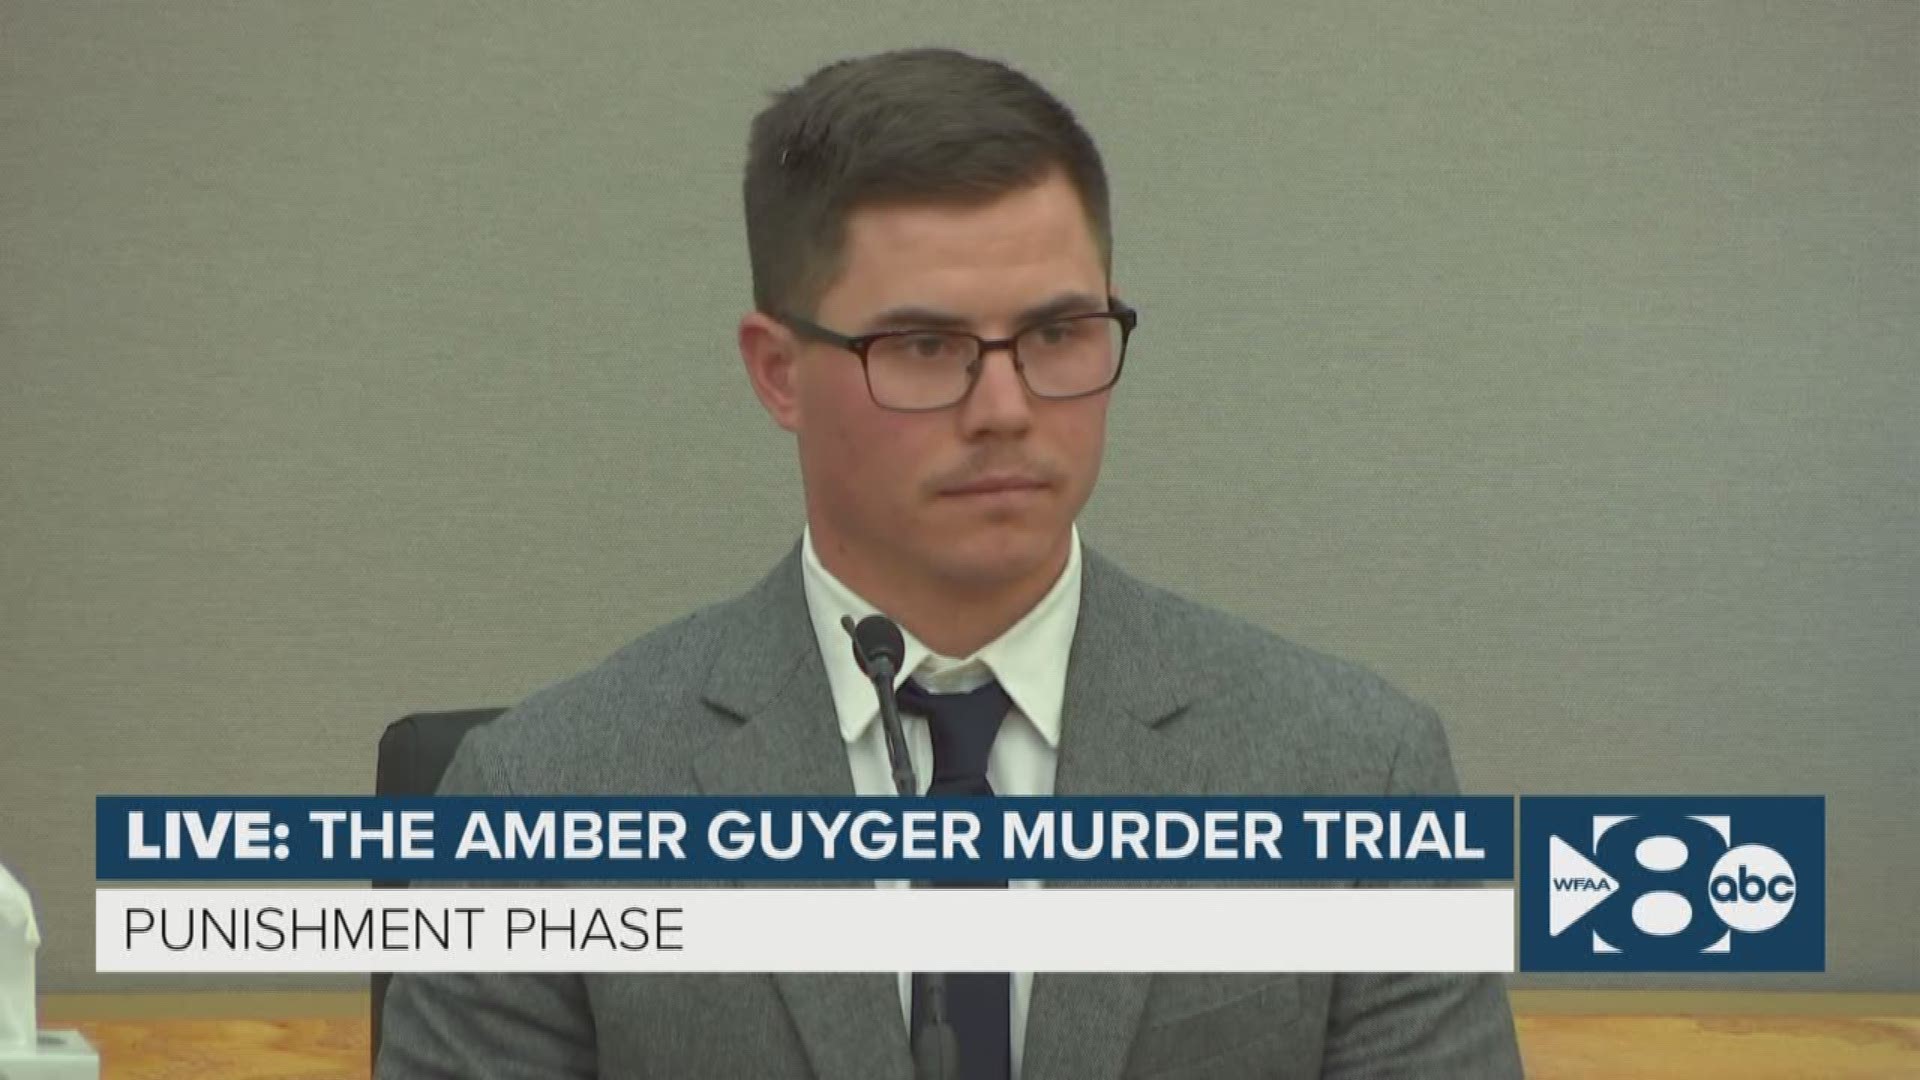 Thomas Macpherson, a friend and colleague of Amber Guyger's, testified Wednesday during the trial.